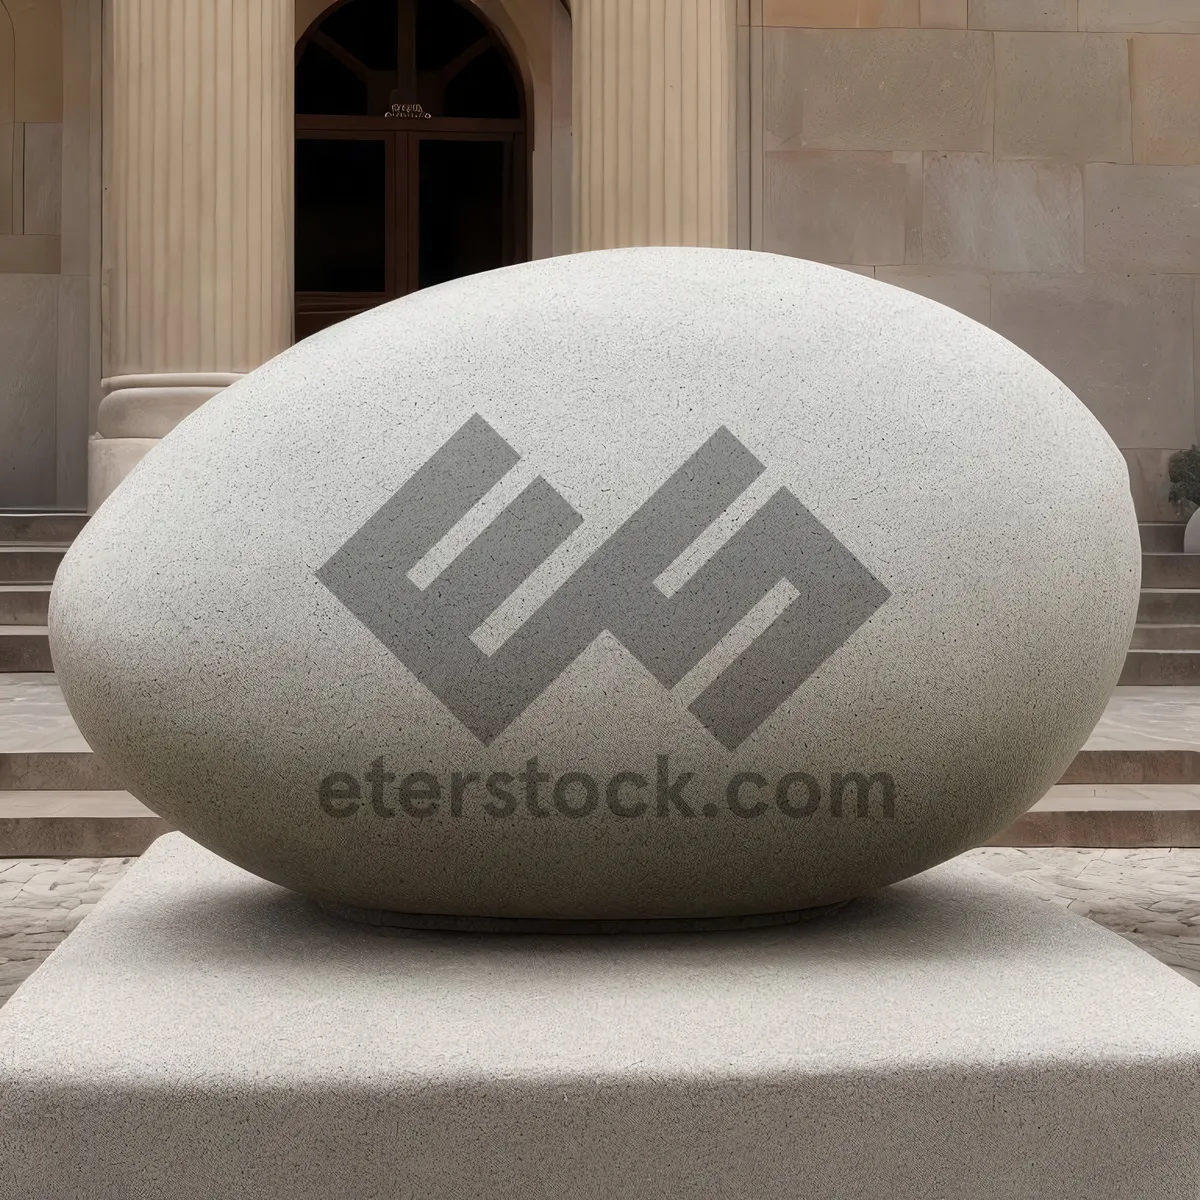 Picture of Elegant Egg Rest Ottoman with Armrest for Ultimate Support